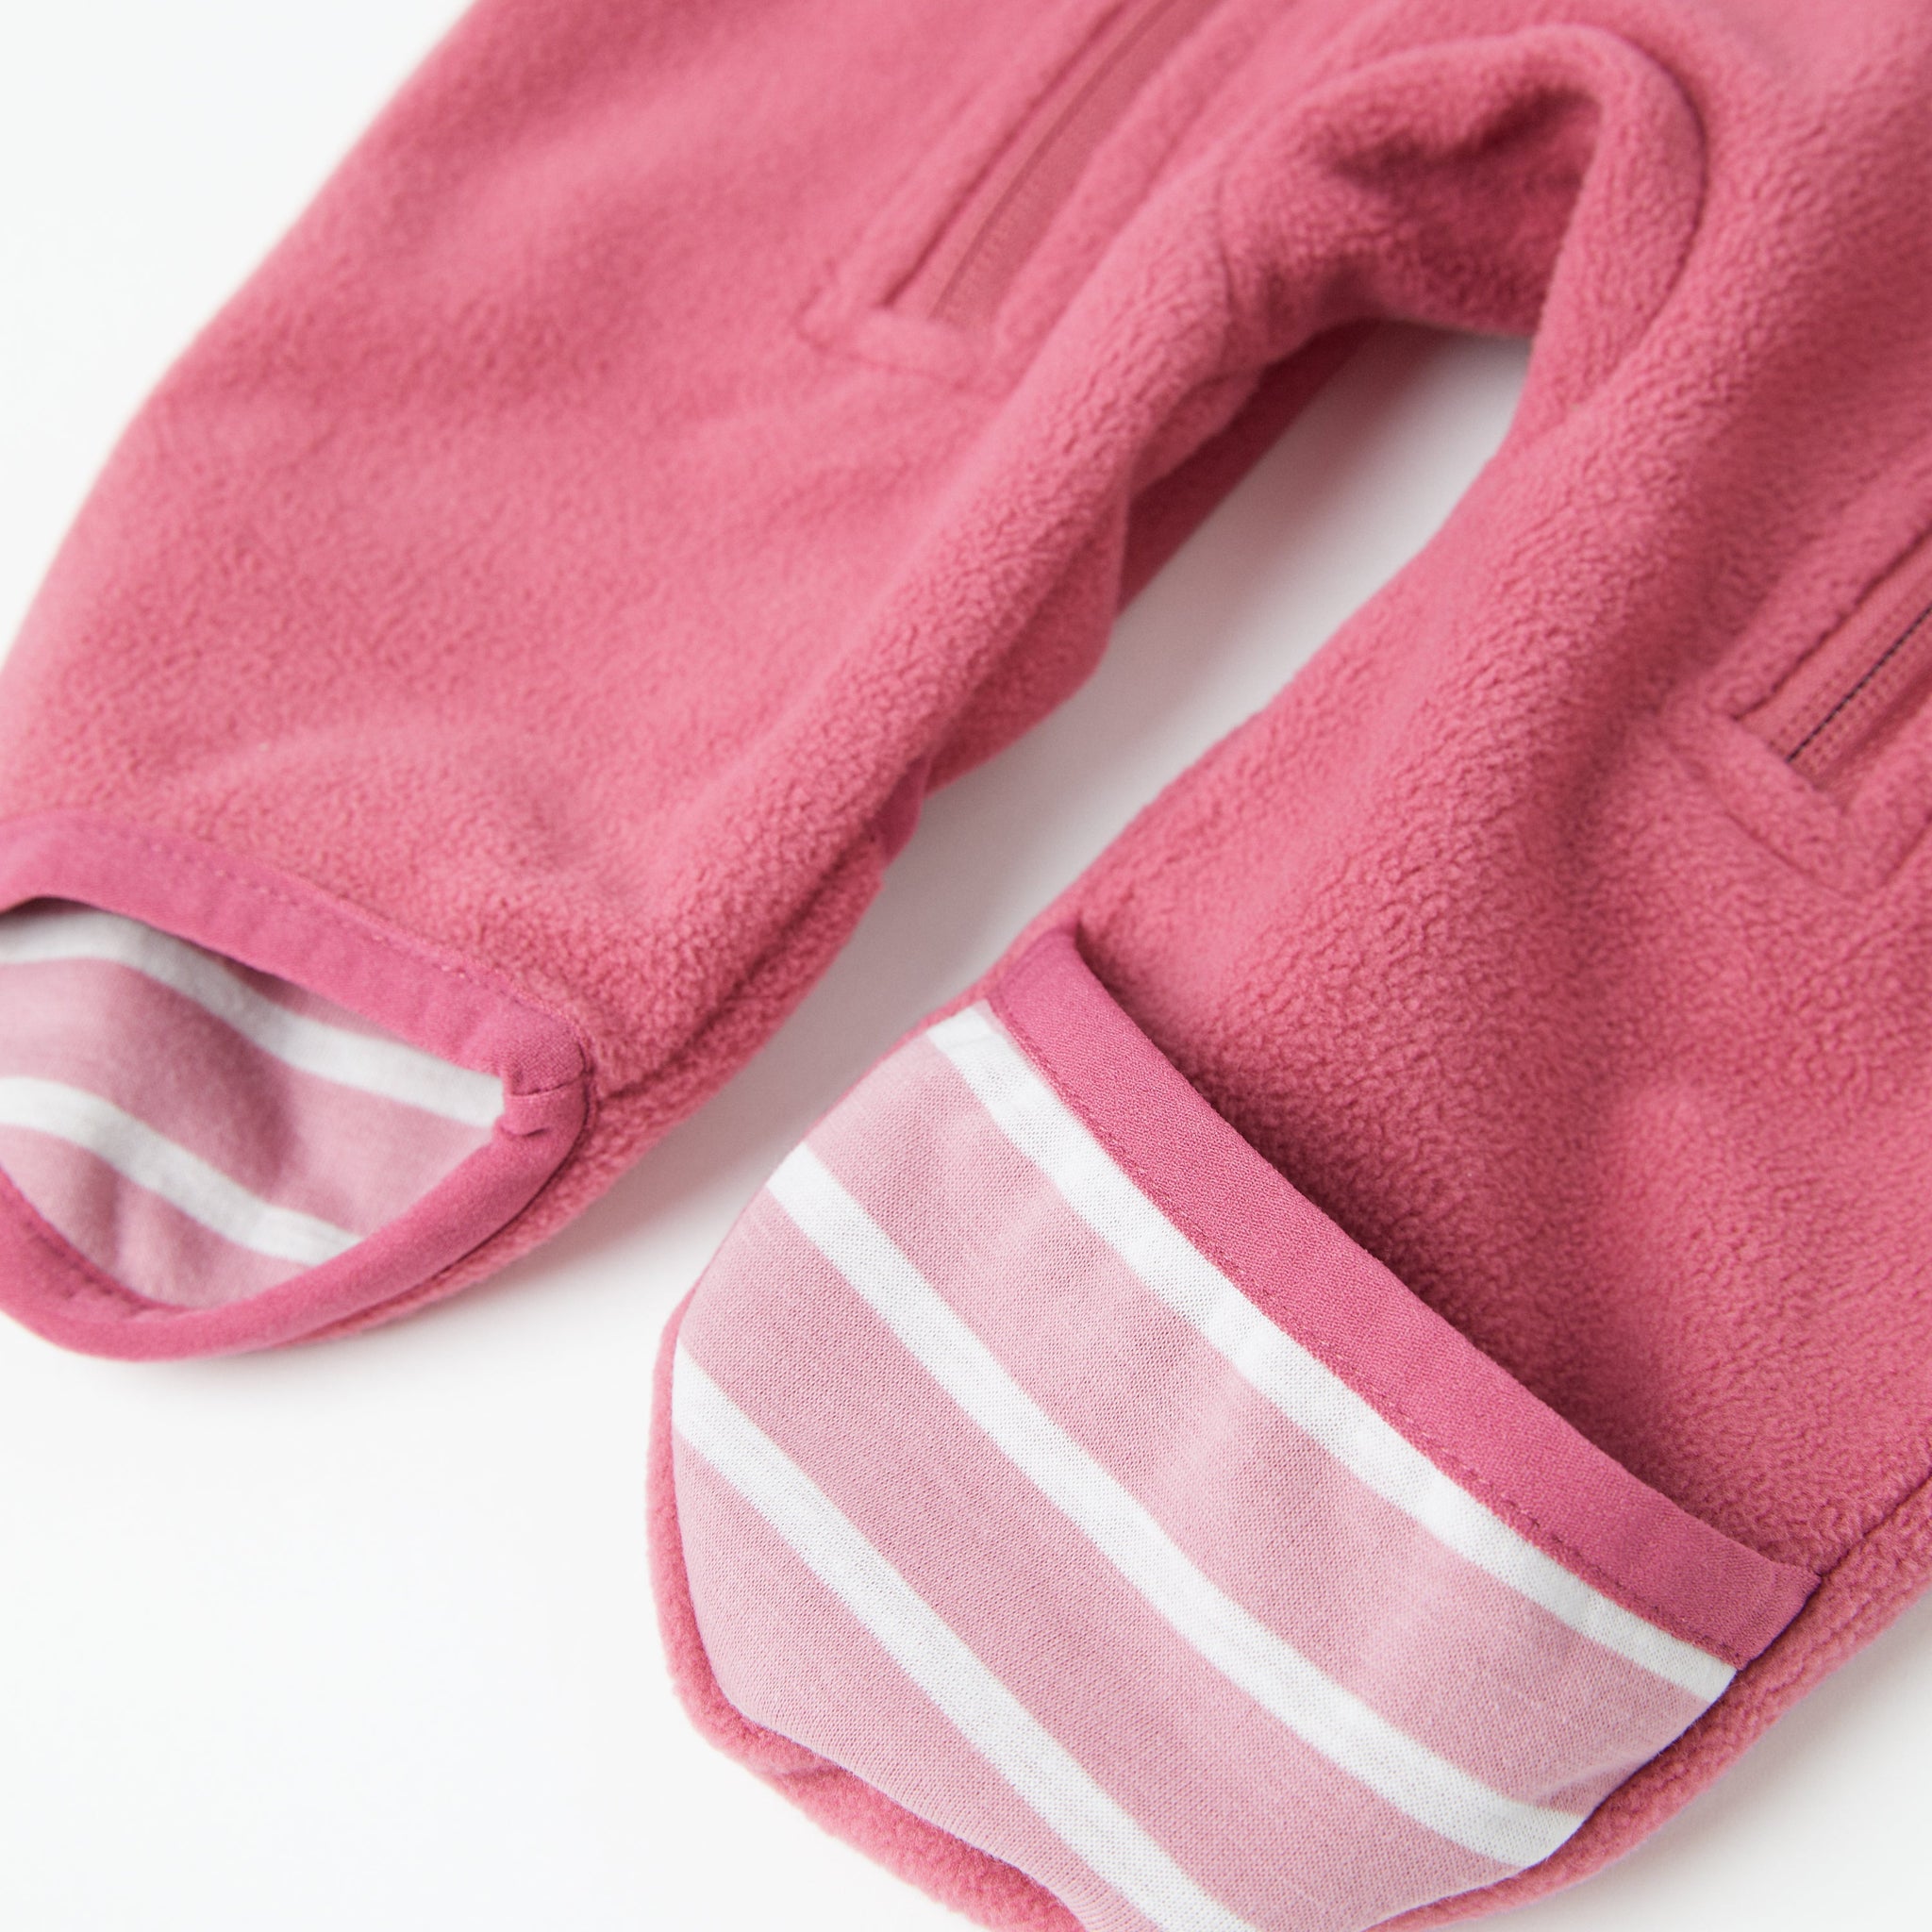 Windproof Pink Baby Pramsuit from the Polarn O. Pyret kidswear collection. Sustainably produced kids outerwear.